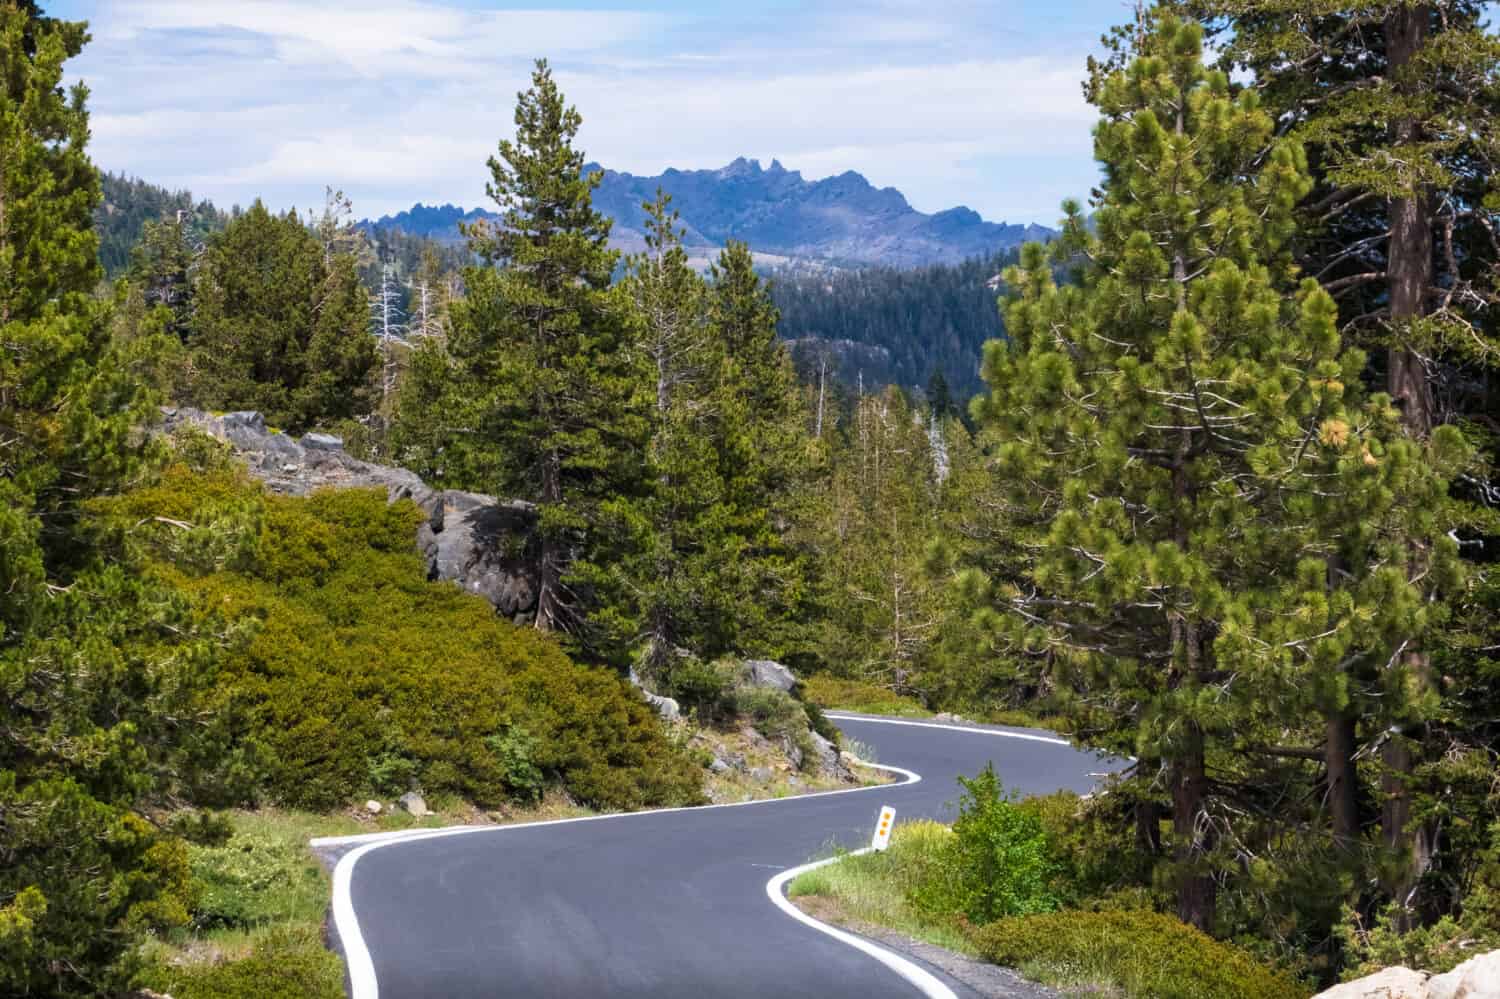 Highway 4 is a Curvy Mountain Pass road  through a California Forest